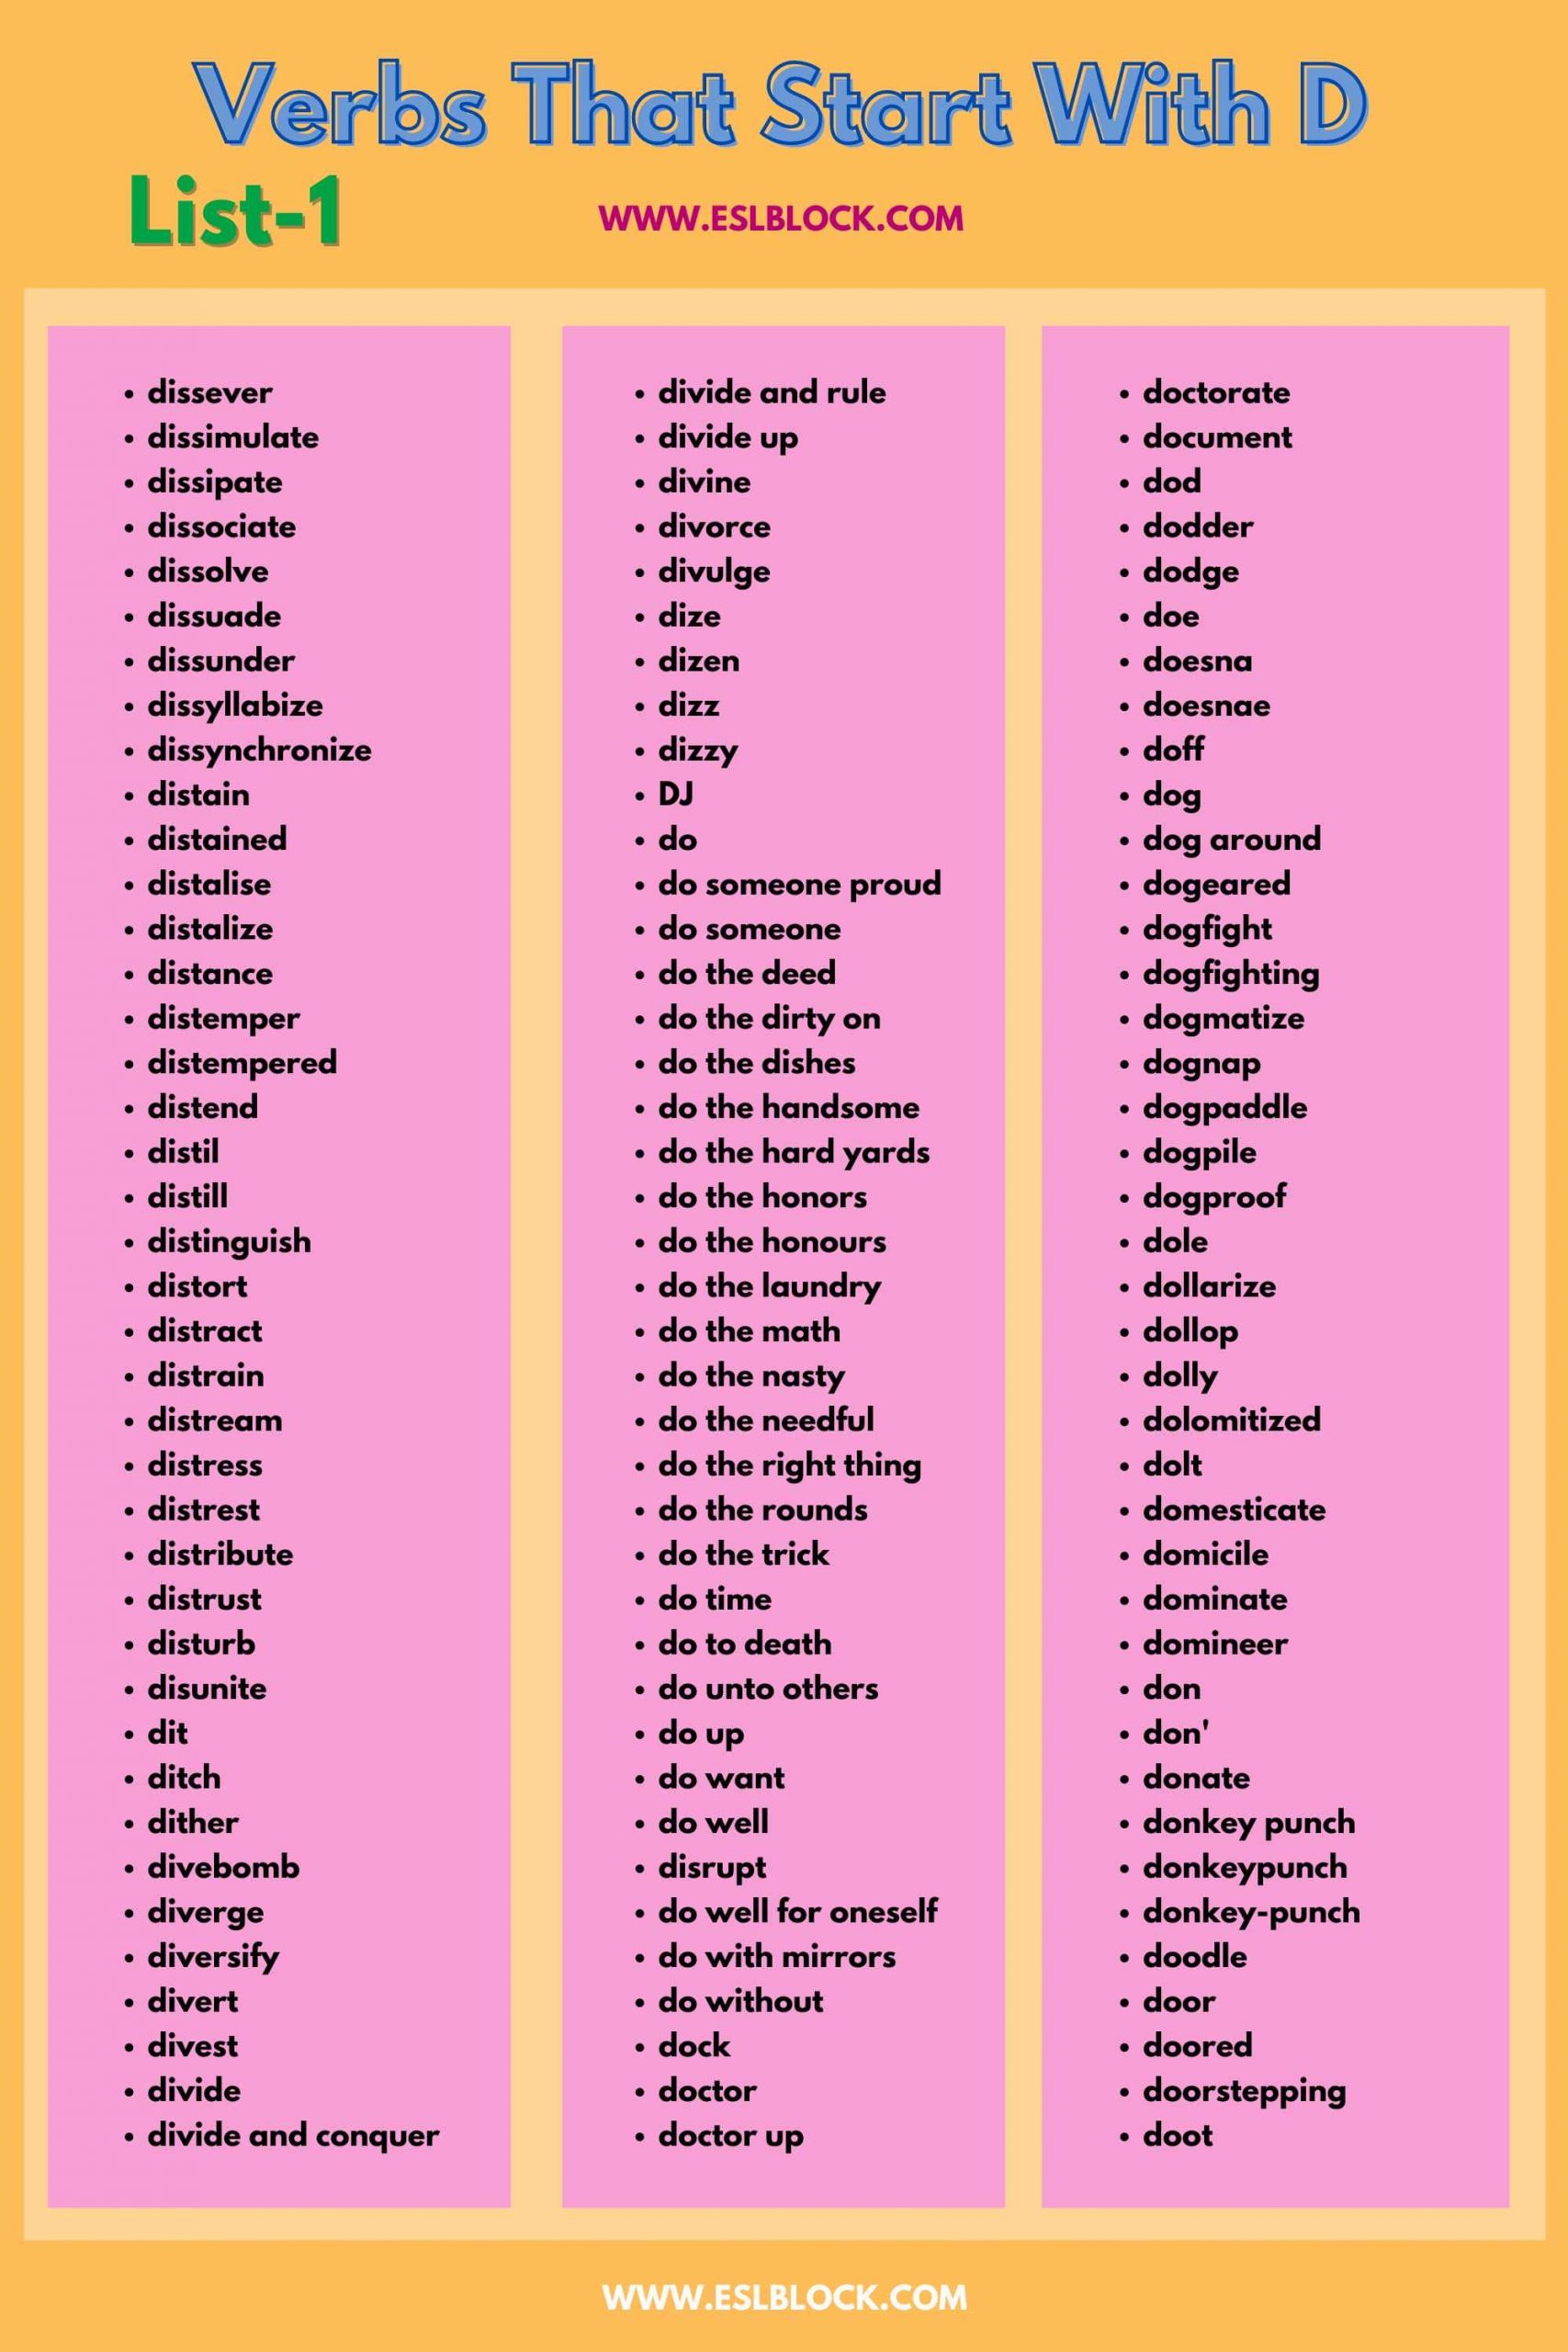 4 Letter Verbs, 5 Letter Verbs Starting With D, Action Words, Action Words That Start With D, D Action Words, D Verbs, D Verbs in English, English, English Grammar, English Vocabulary, English Words, List of Verbs That Start With D, Verbs List, Verbs That Start With D, Vocabulary, Words That Start With D